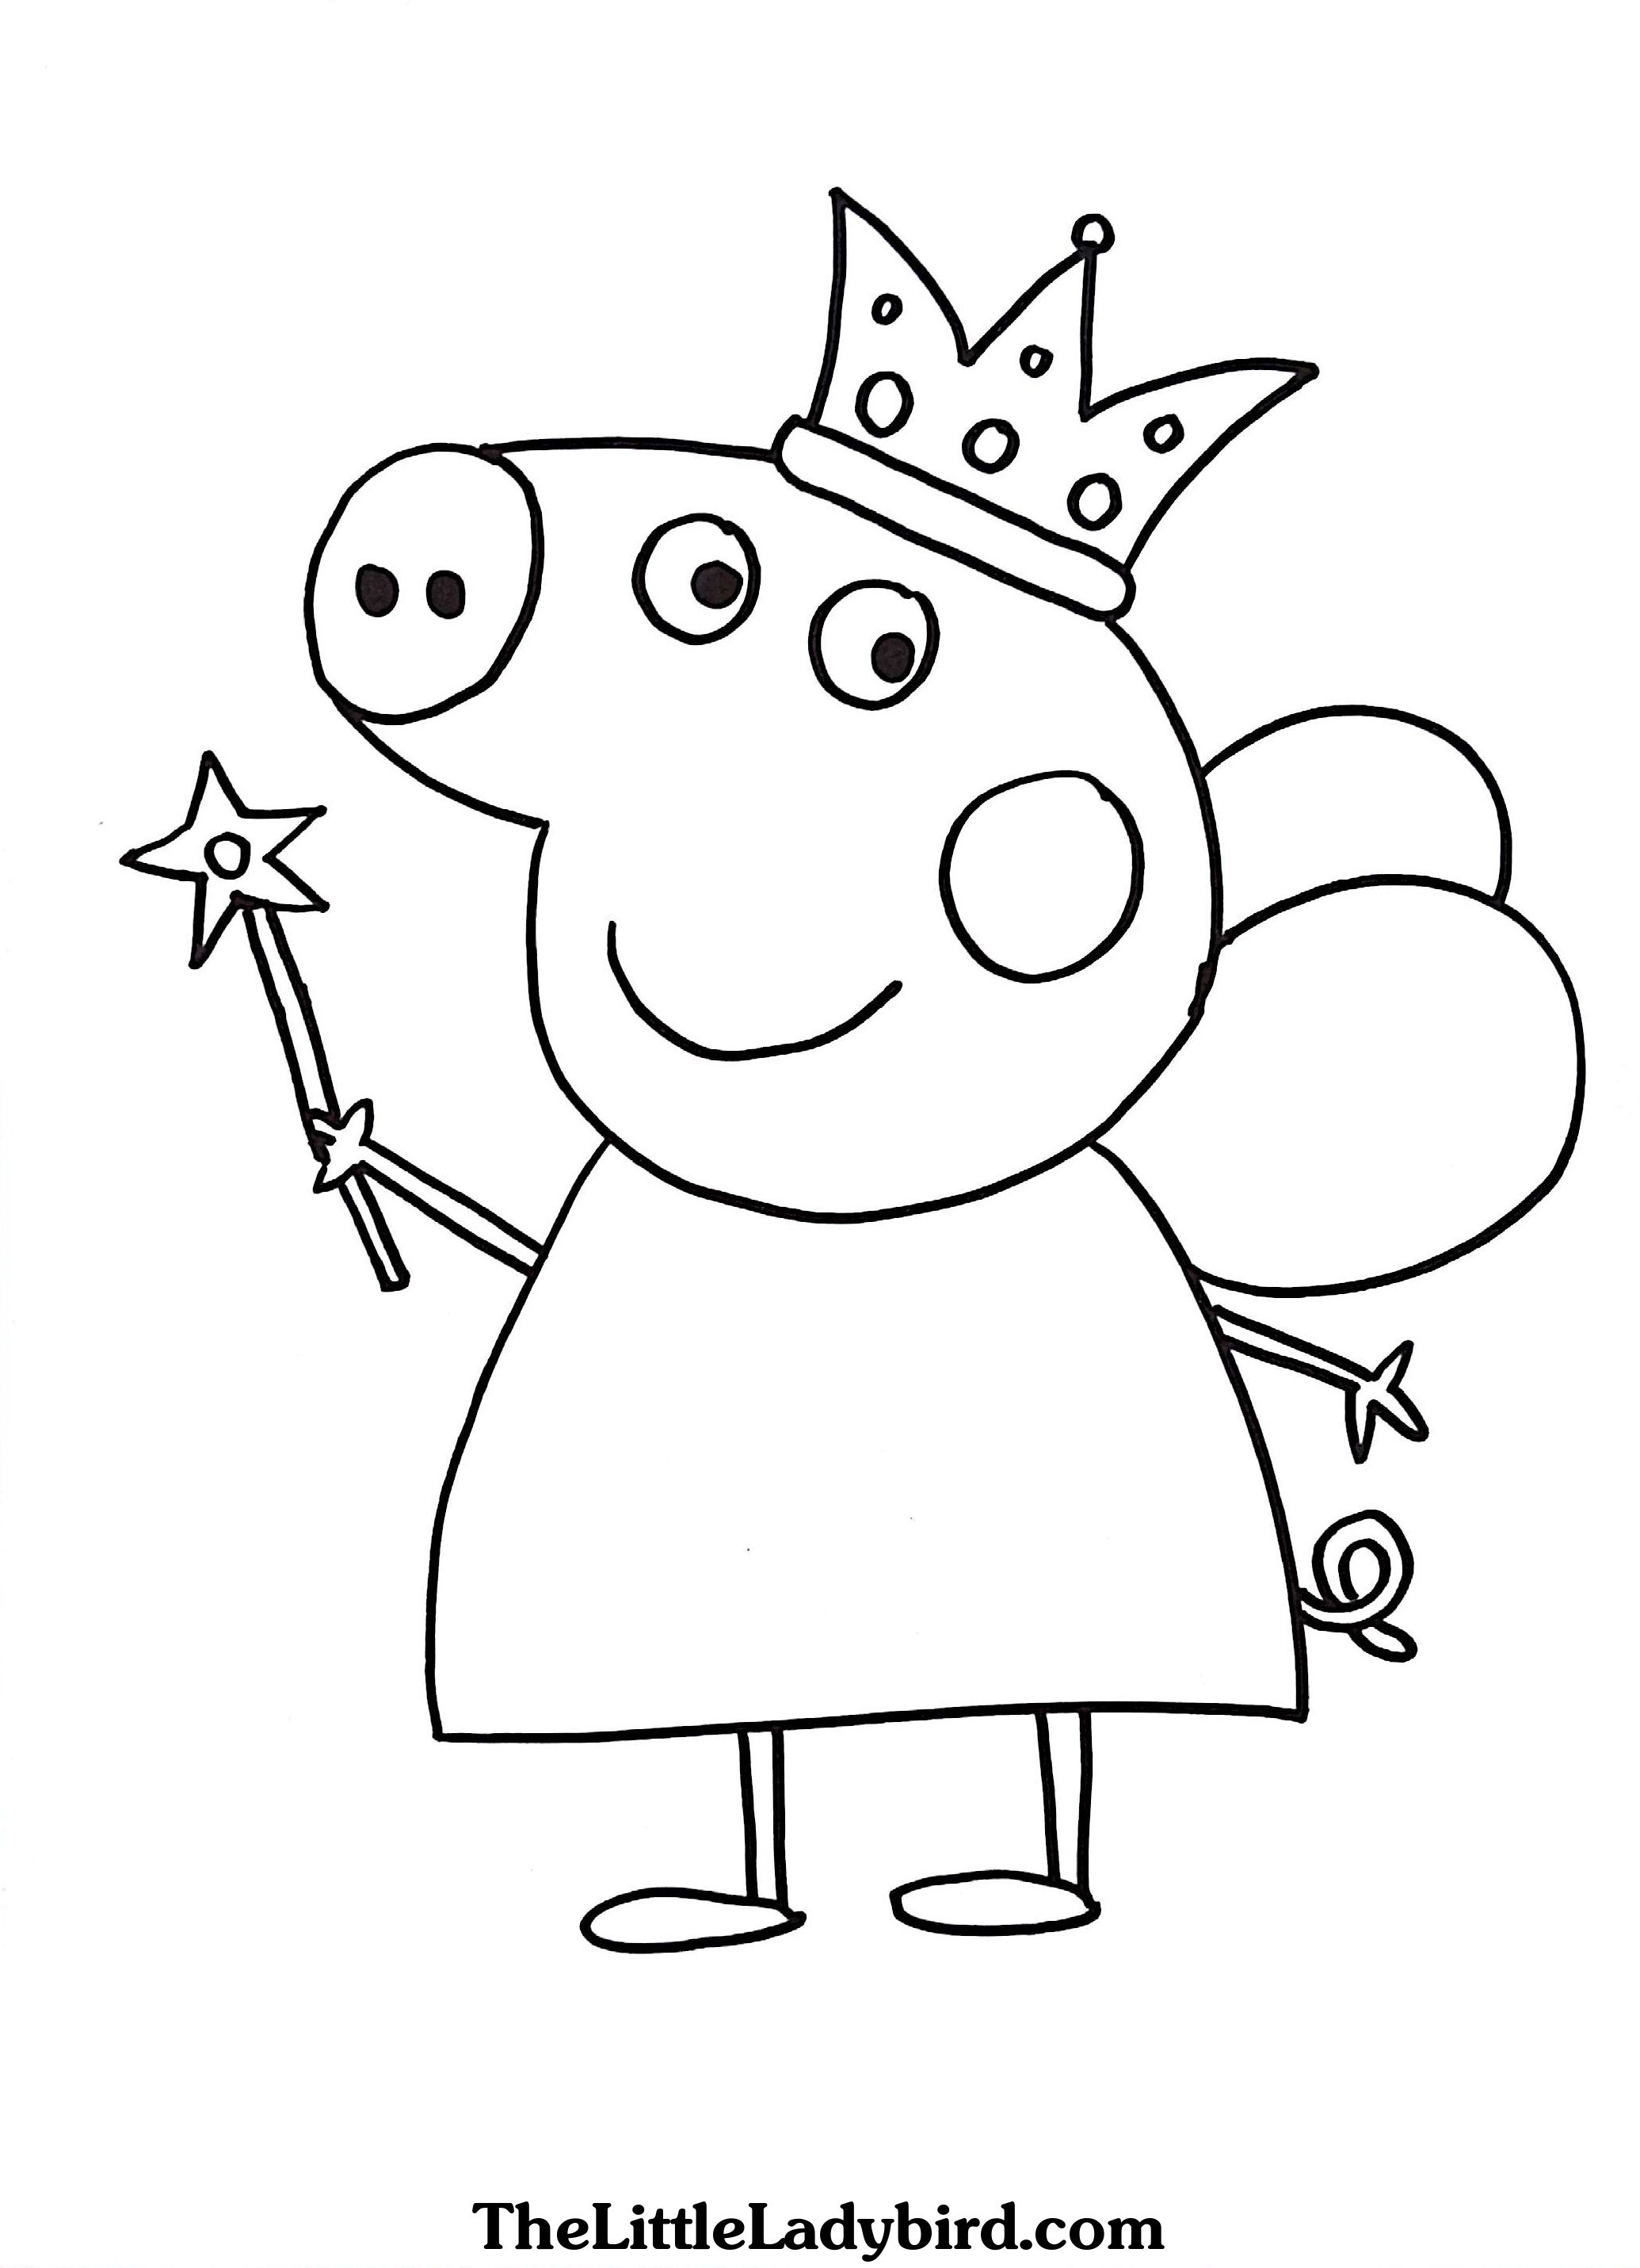 Peppa Pig Coloring Pages line Lovely Peppa Pig Coloring Pages Free Free Coloring Library